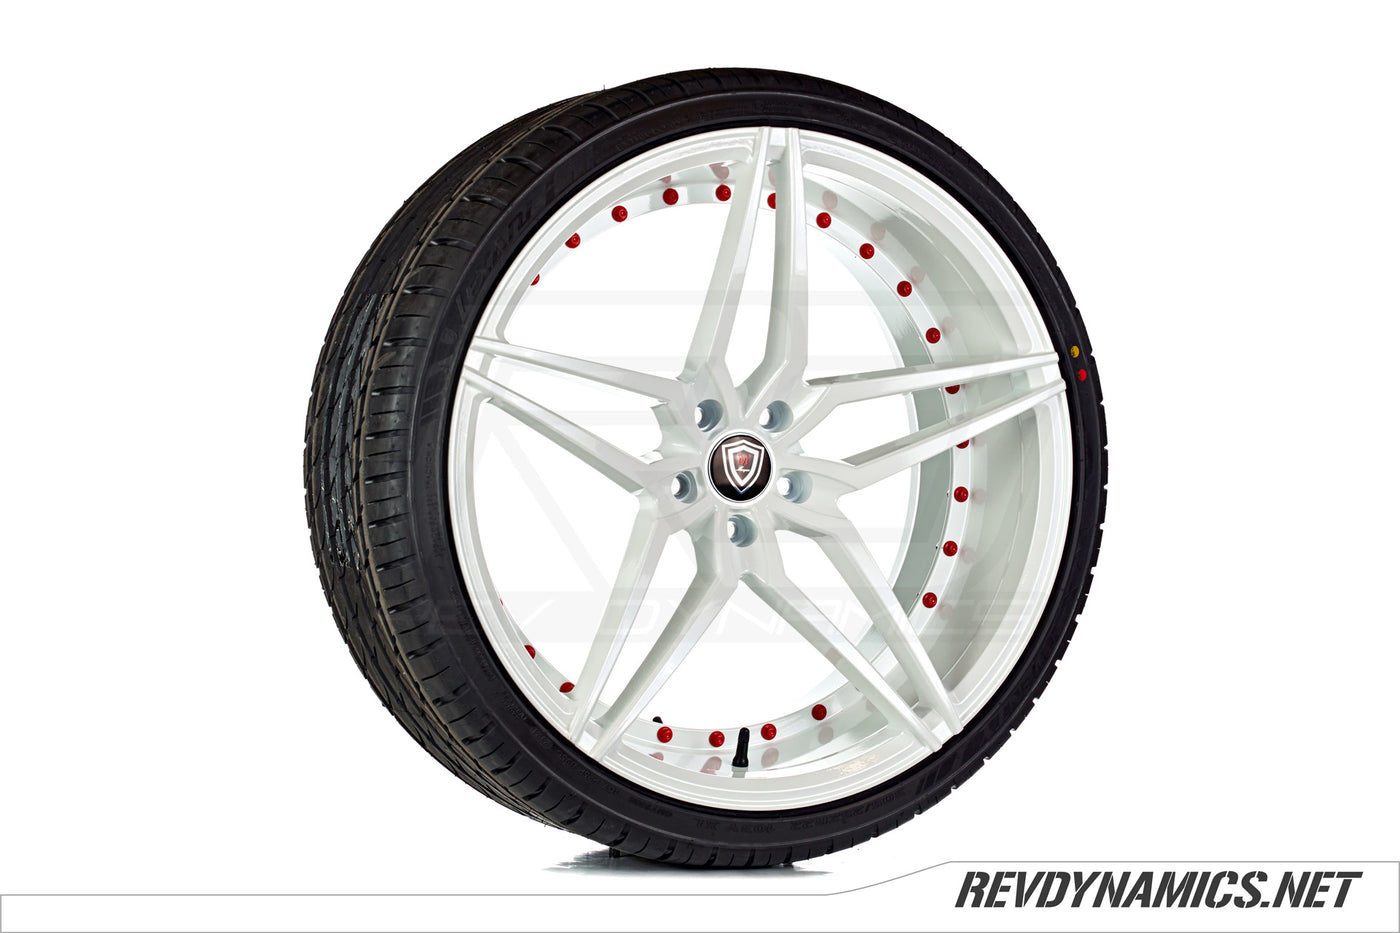 Marquee M3259 22" Rim Powdercoated White with Red Hardware Polaris Slingshot colors 